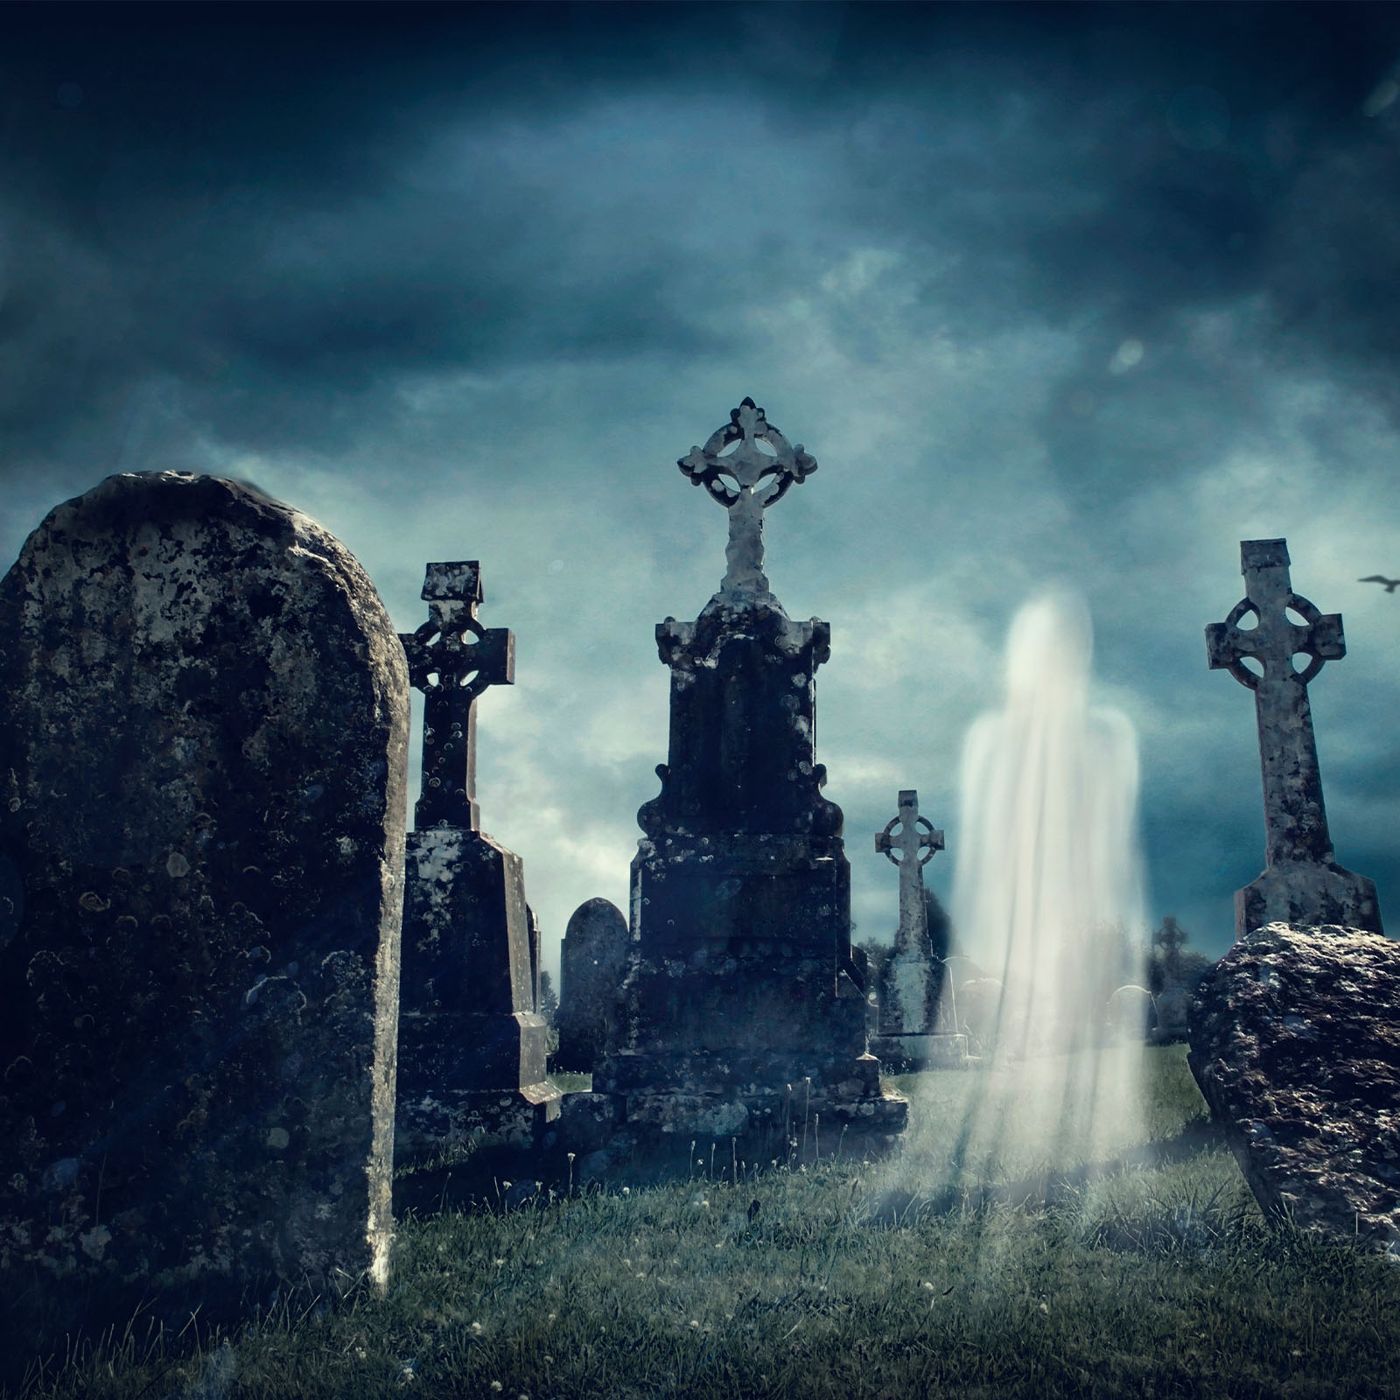 Ep.160 – Ghost in the Graveyard - On Halloween Spirits Are on the Loose! Image